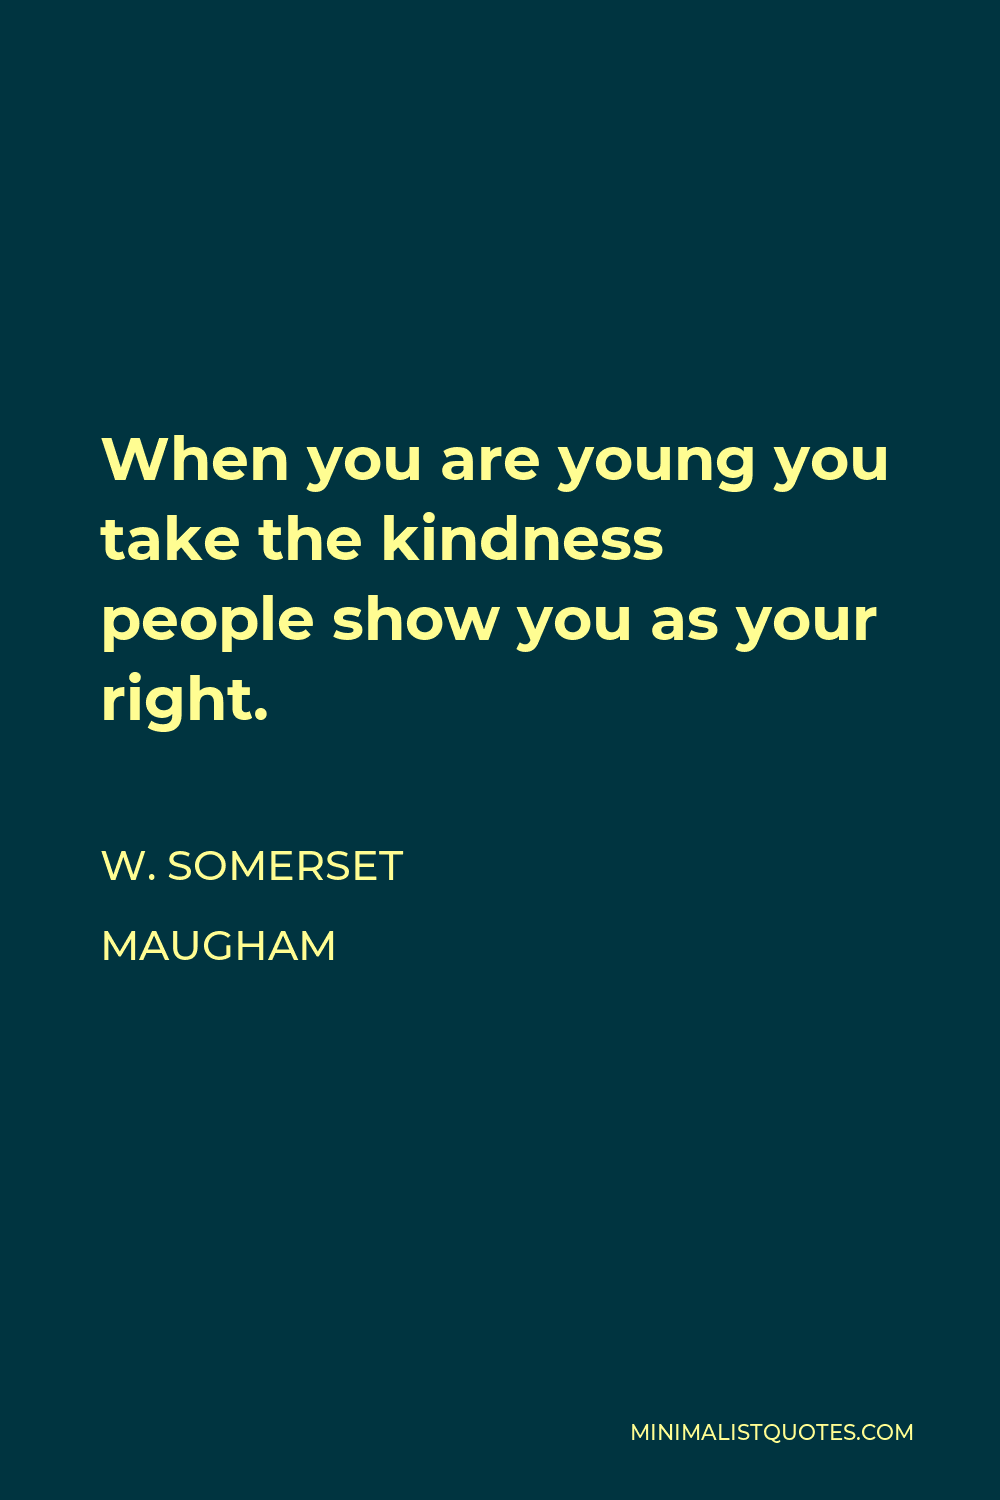 W. Somerset Maugham Quote - When you are young you take the kindness people show you as your right.